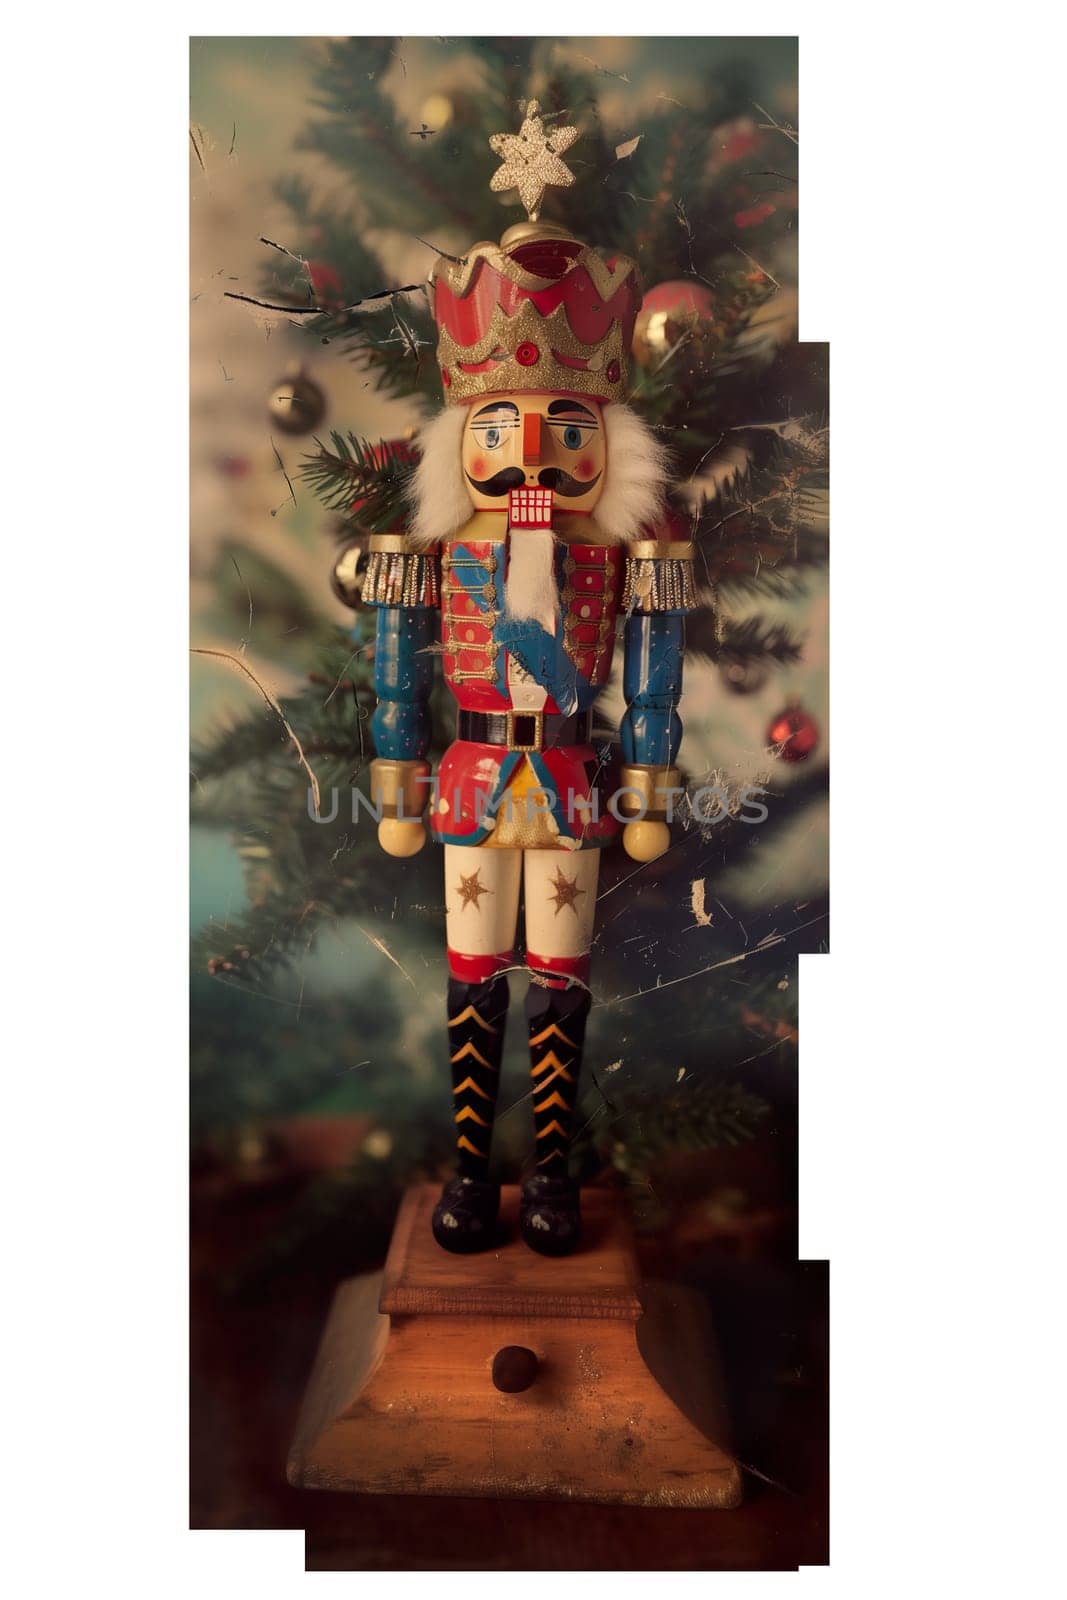 Christmas Nutcracker cut out old fashioned photo by Dustick